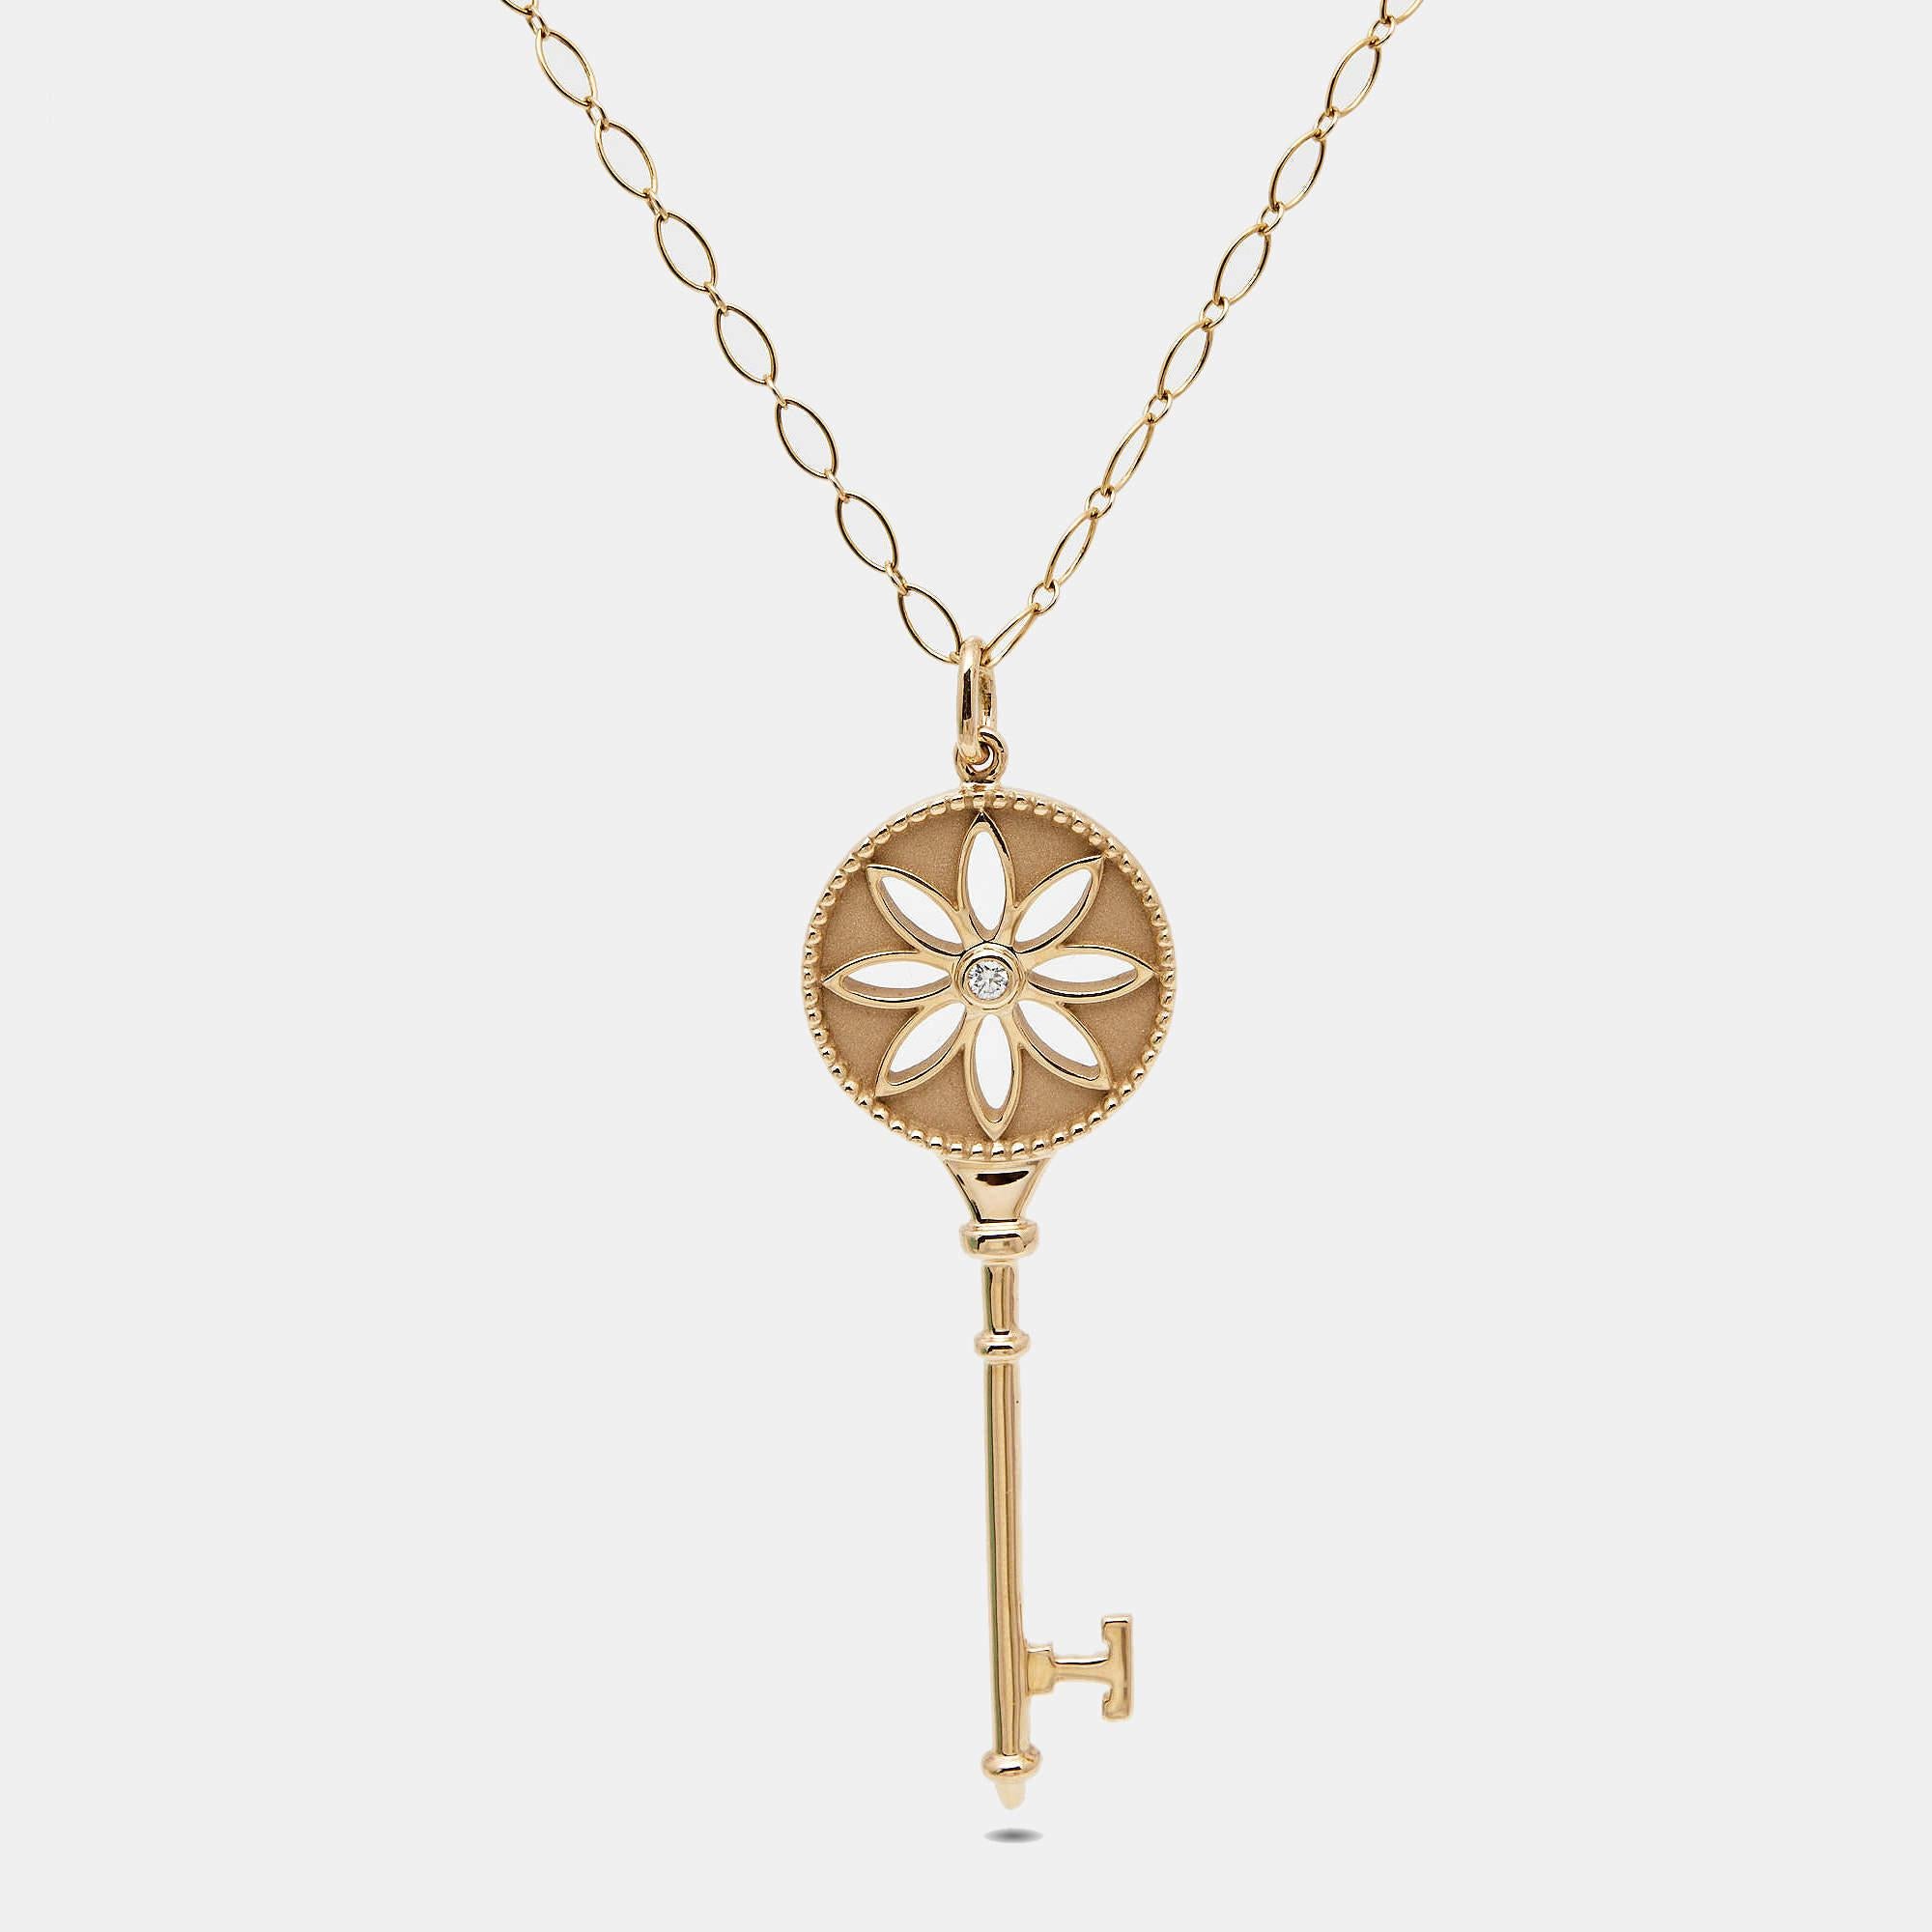 Radiating hope and optimism and symbolizing a bright future, the Tiffany keys from Tiffany & Co. are much loved and instantly recognizable. This pendant necklace, featuring the iconic key, comes crafted from 18K rose gold. It is detailed with a